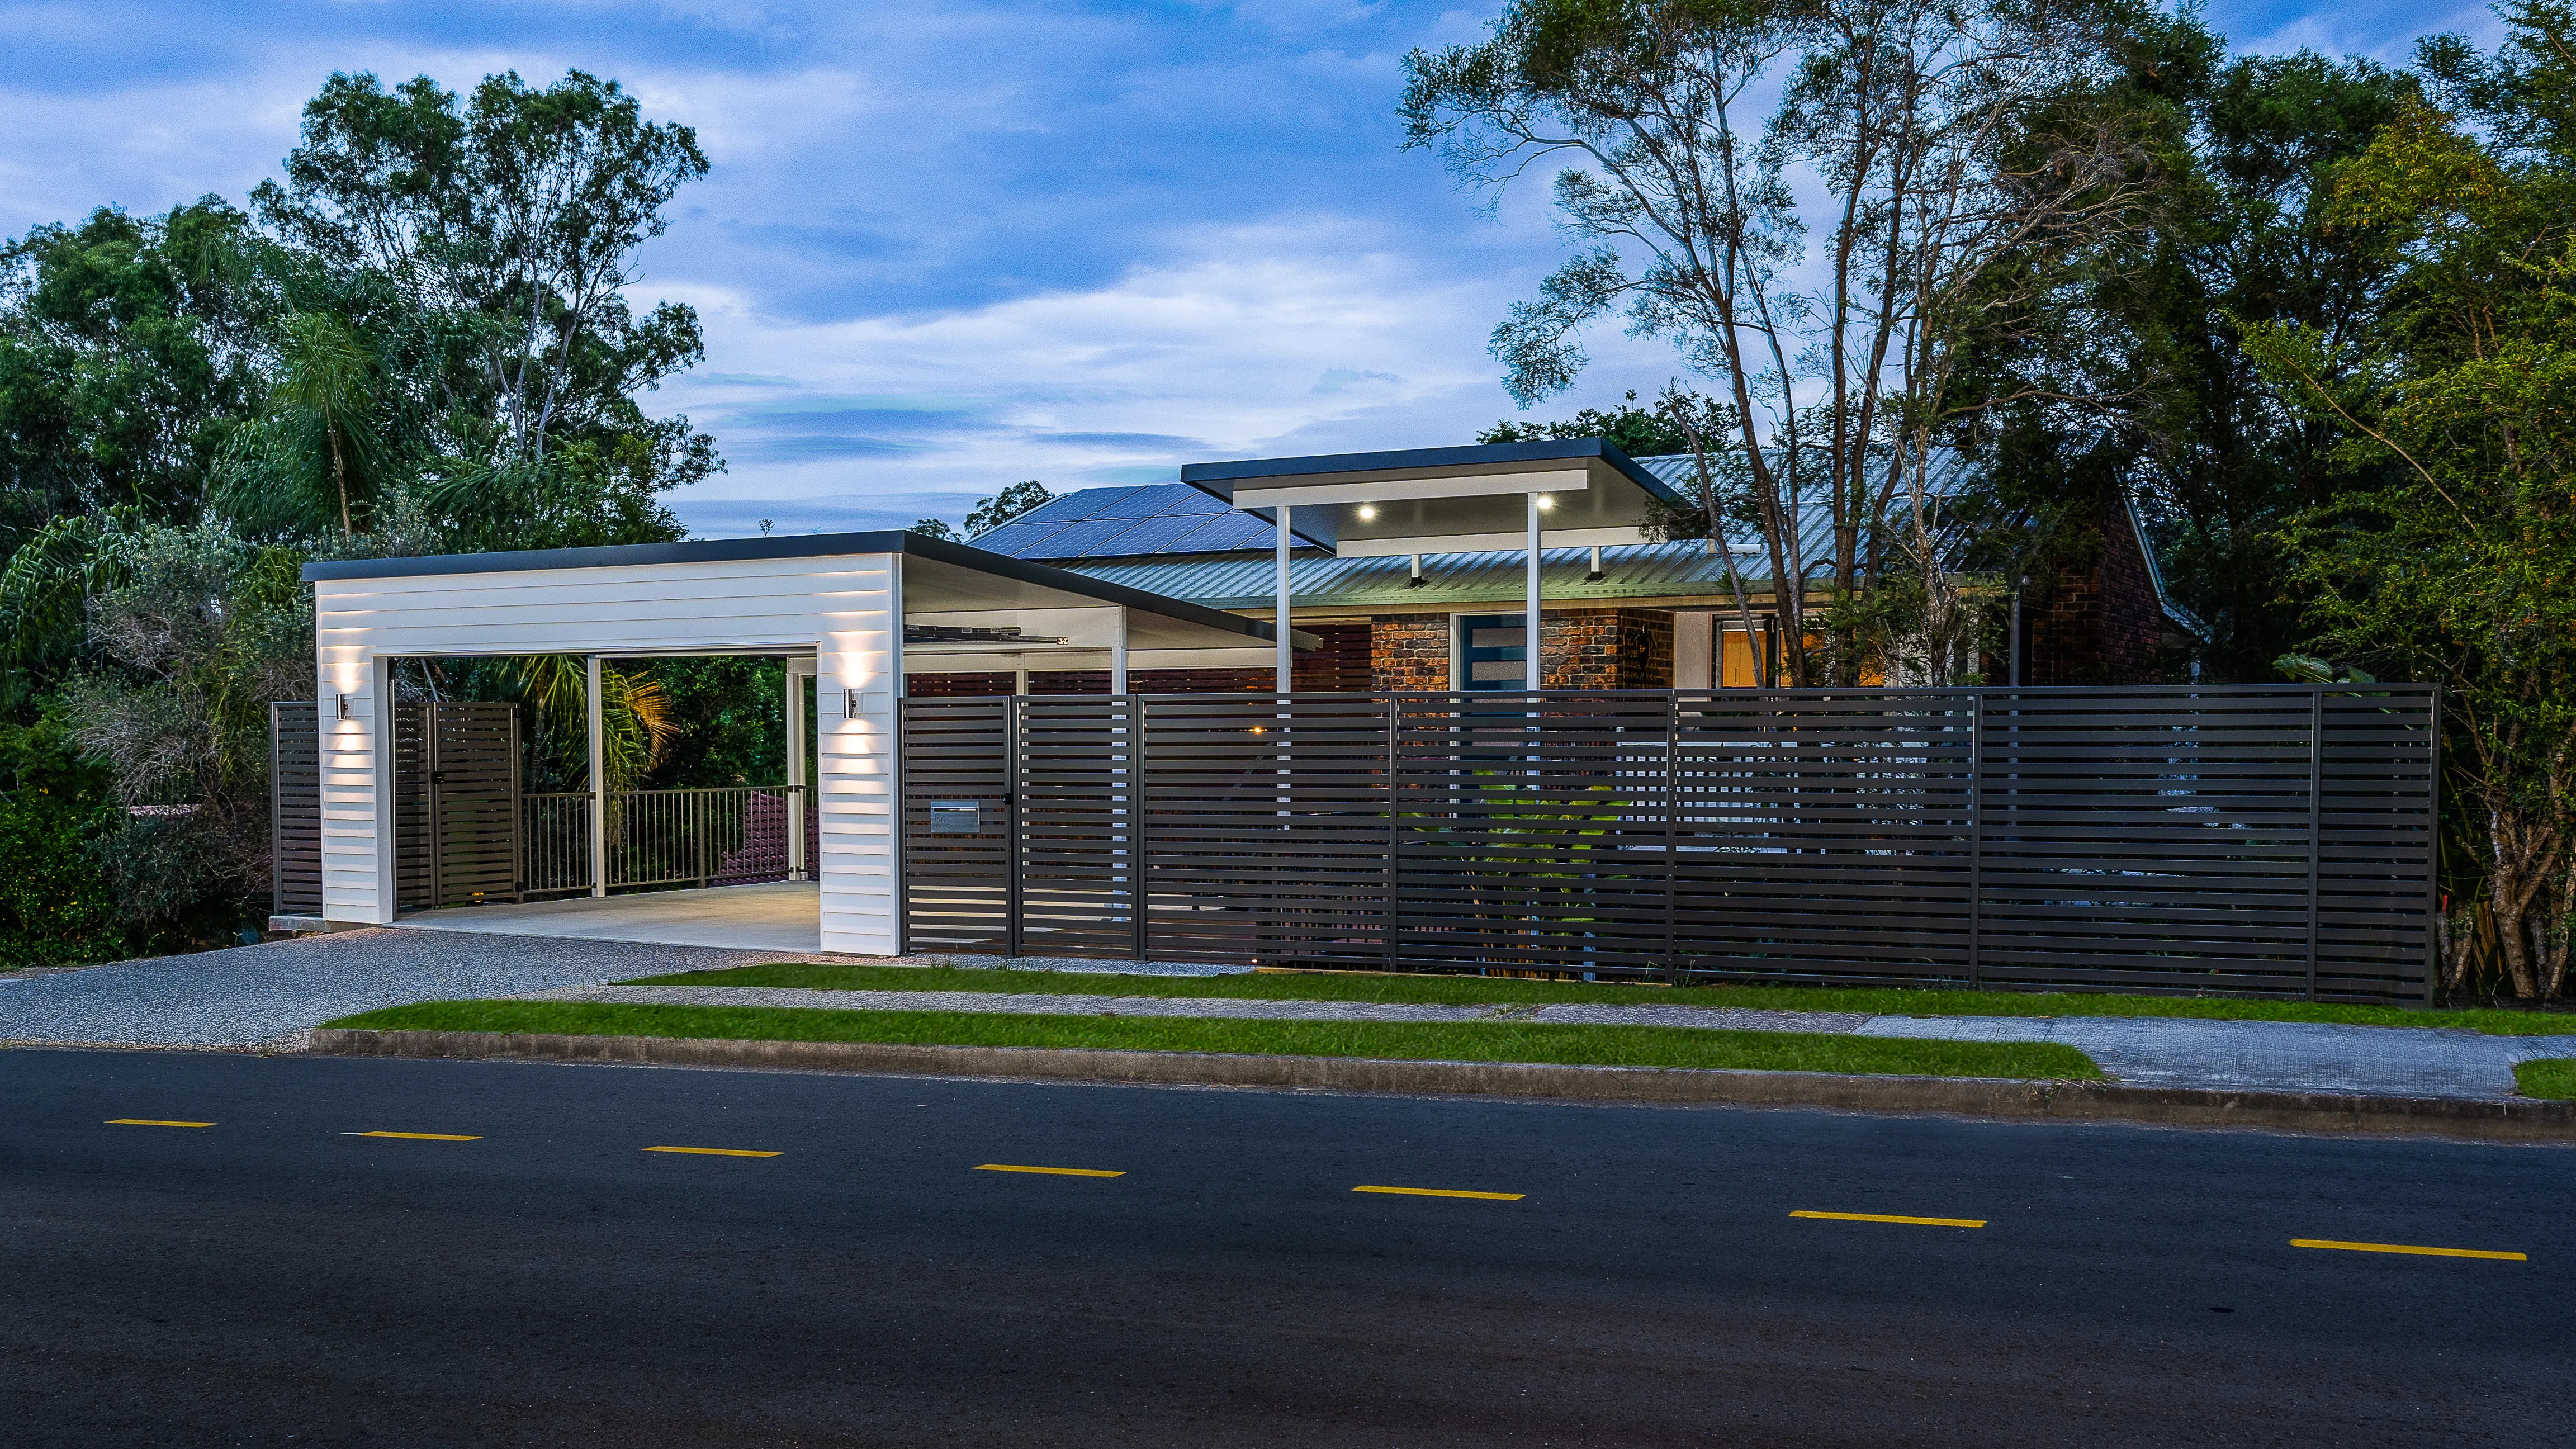 Carport and boundary fence and exposed concrete driveway